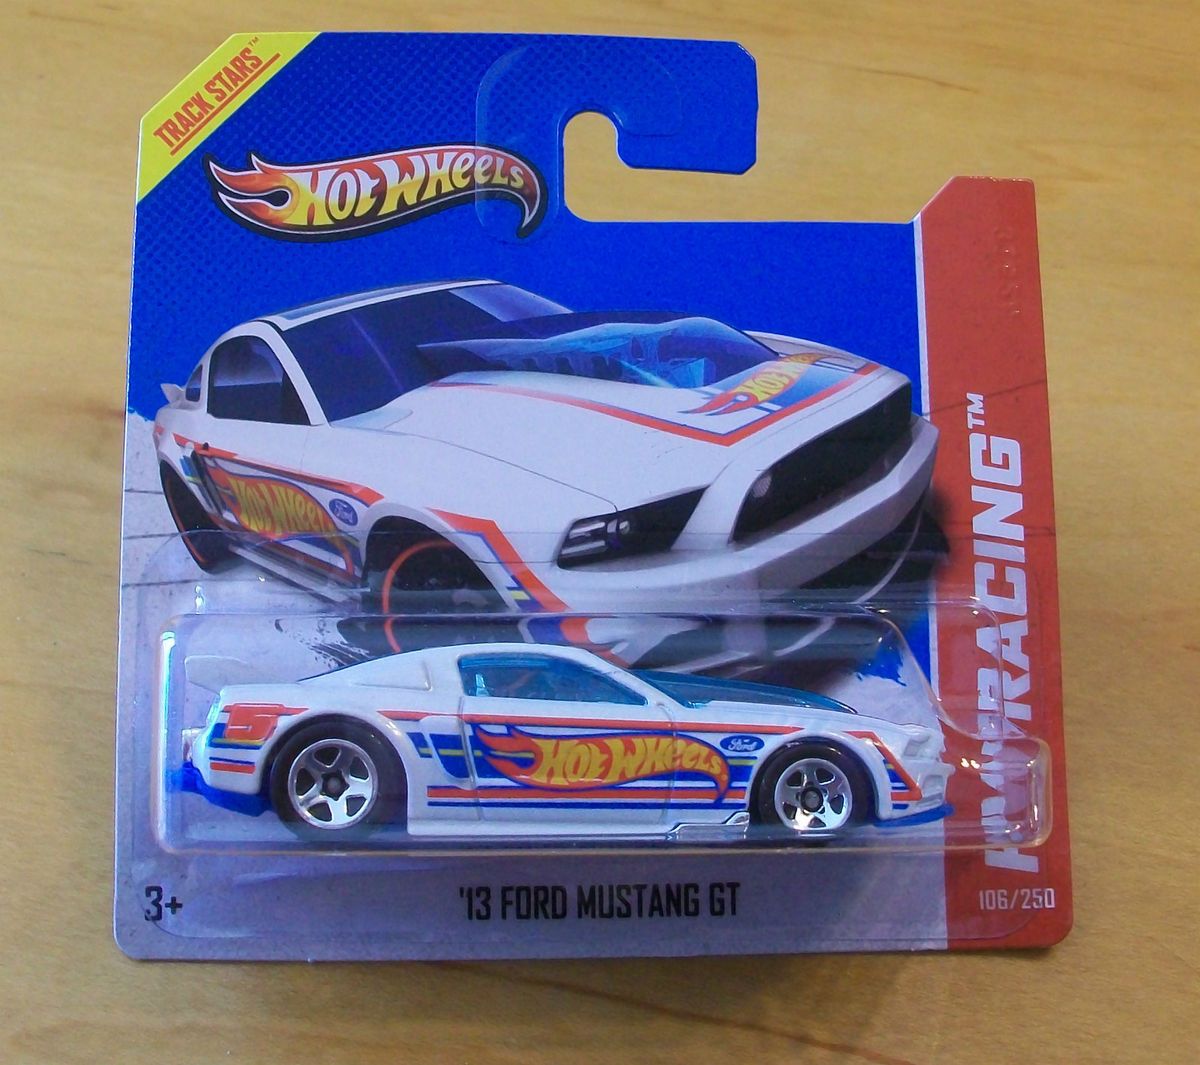 VHTF 2013 Hot Wheels HW Racing Series 13 Ford Mustang GT White with